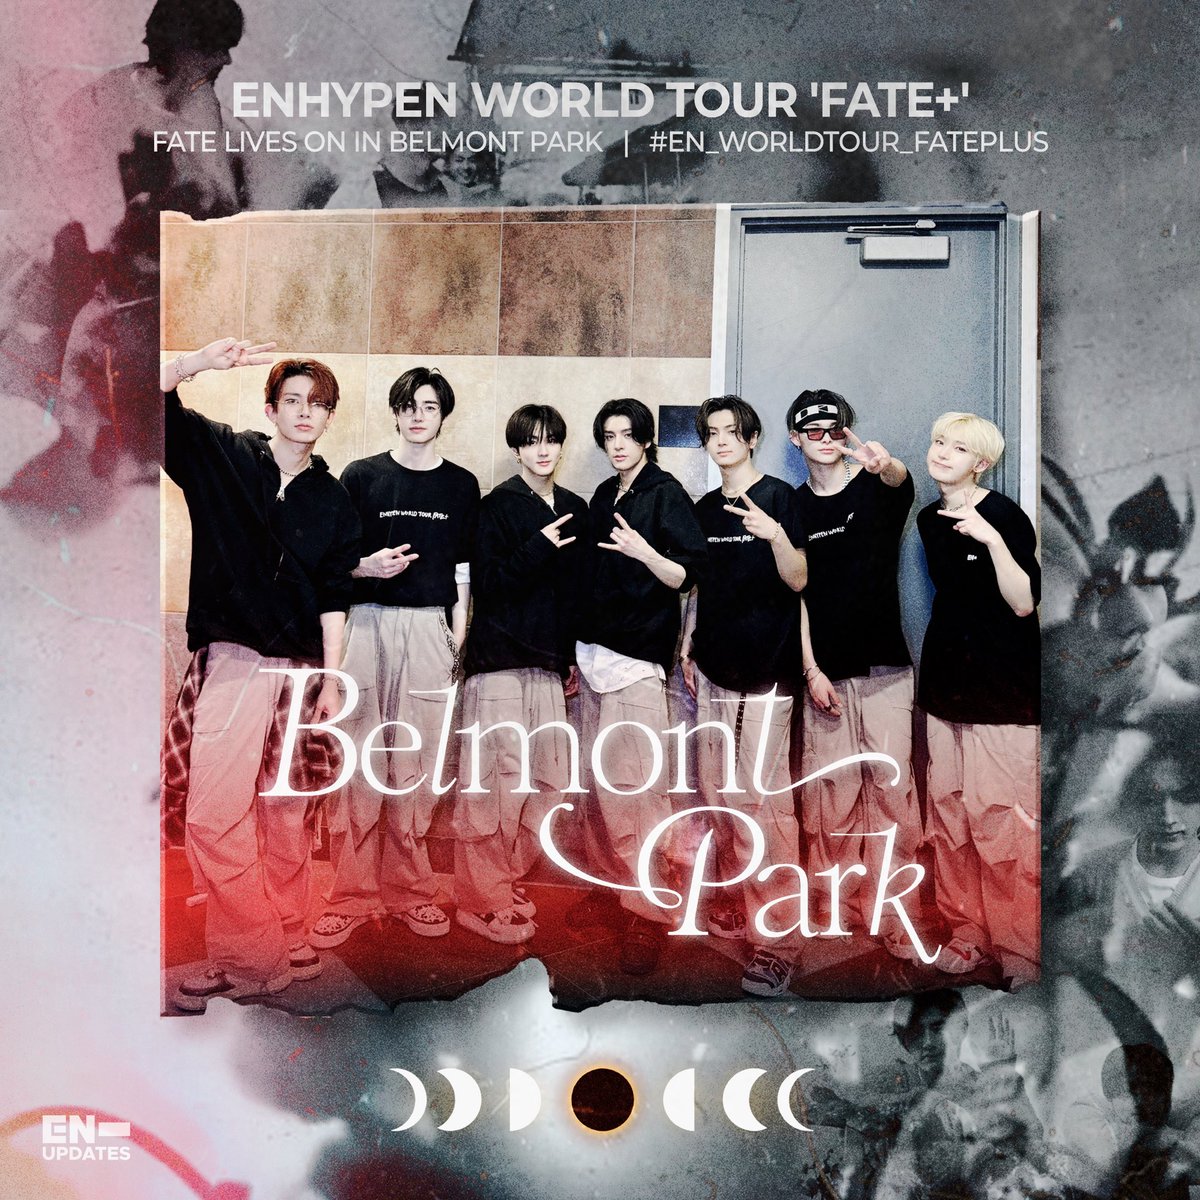 We’re now on the last stop of ‘FATE PLUS’ tour in the U.S.! As we bid farewell to this chapter, let’s continue to cherish the memories we made and eagerly anticipate what the future holds for ENHYPEN. 🥳

🔒 700 Replies & RTs

FATE LIVES ON IN BELMONT PARK
#EN_WORLDTOUR_FATEPLUS…